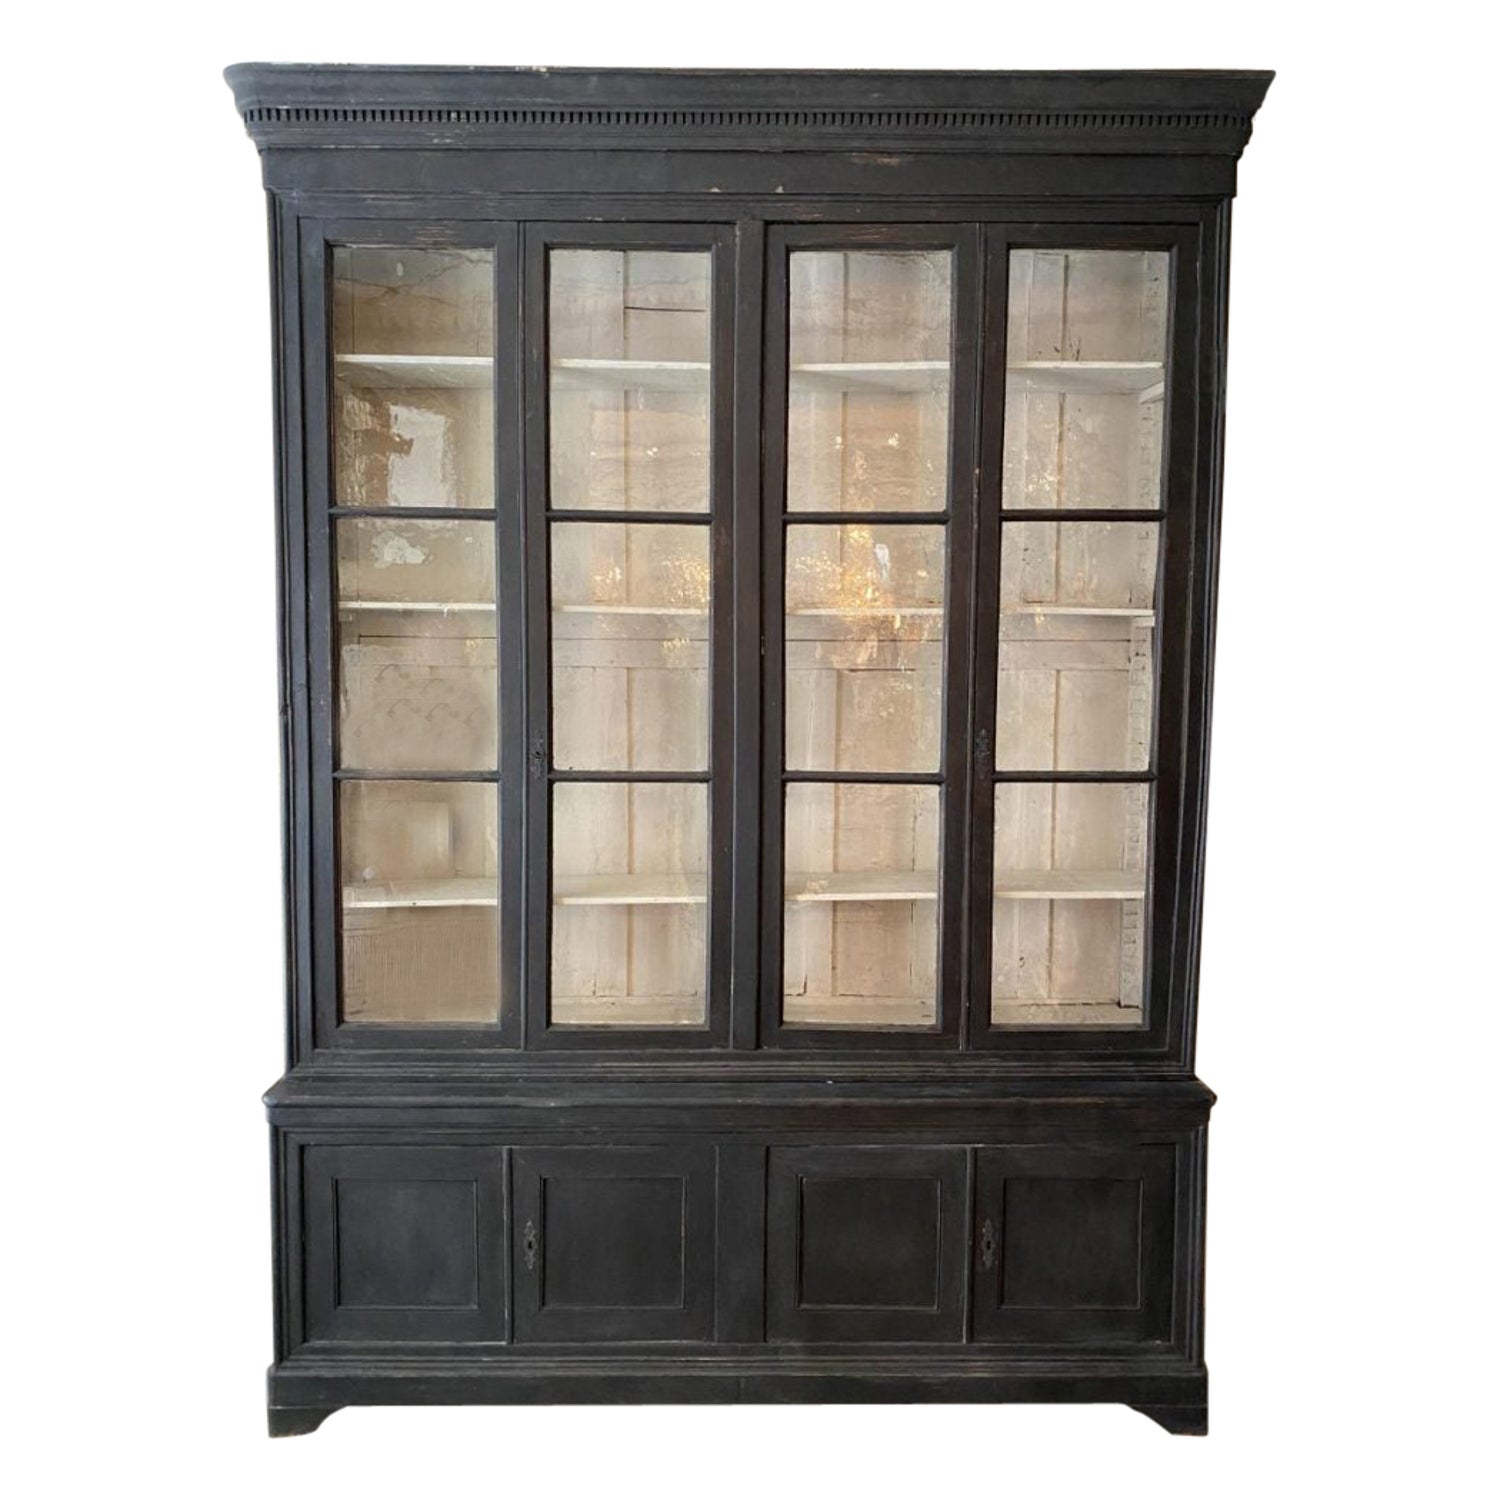 Early 1900 Two Part French Display Cabinet / Tallboy For Sale at 1stDibs